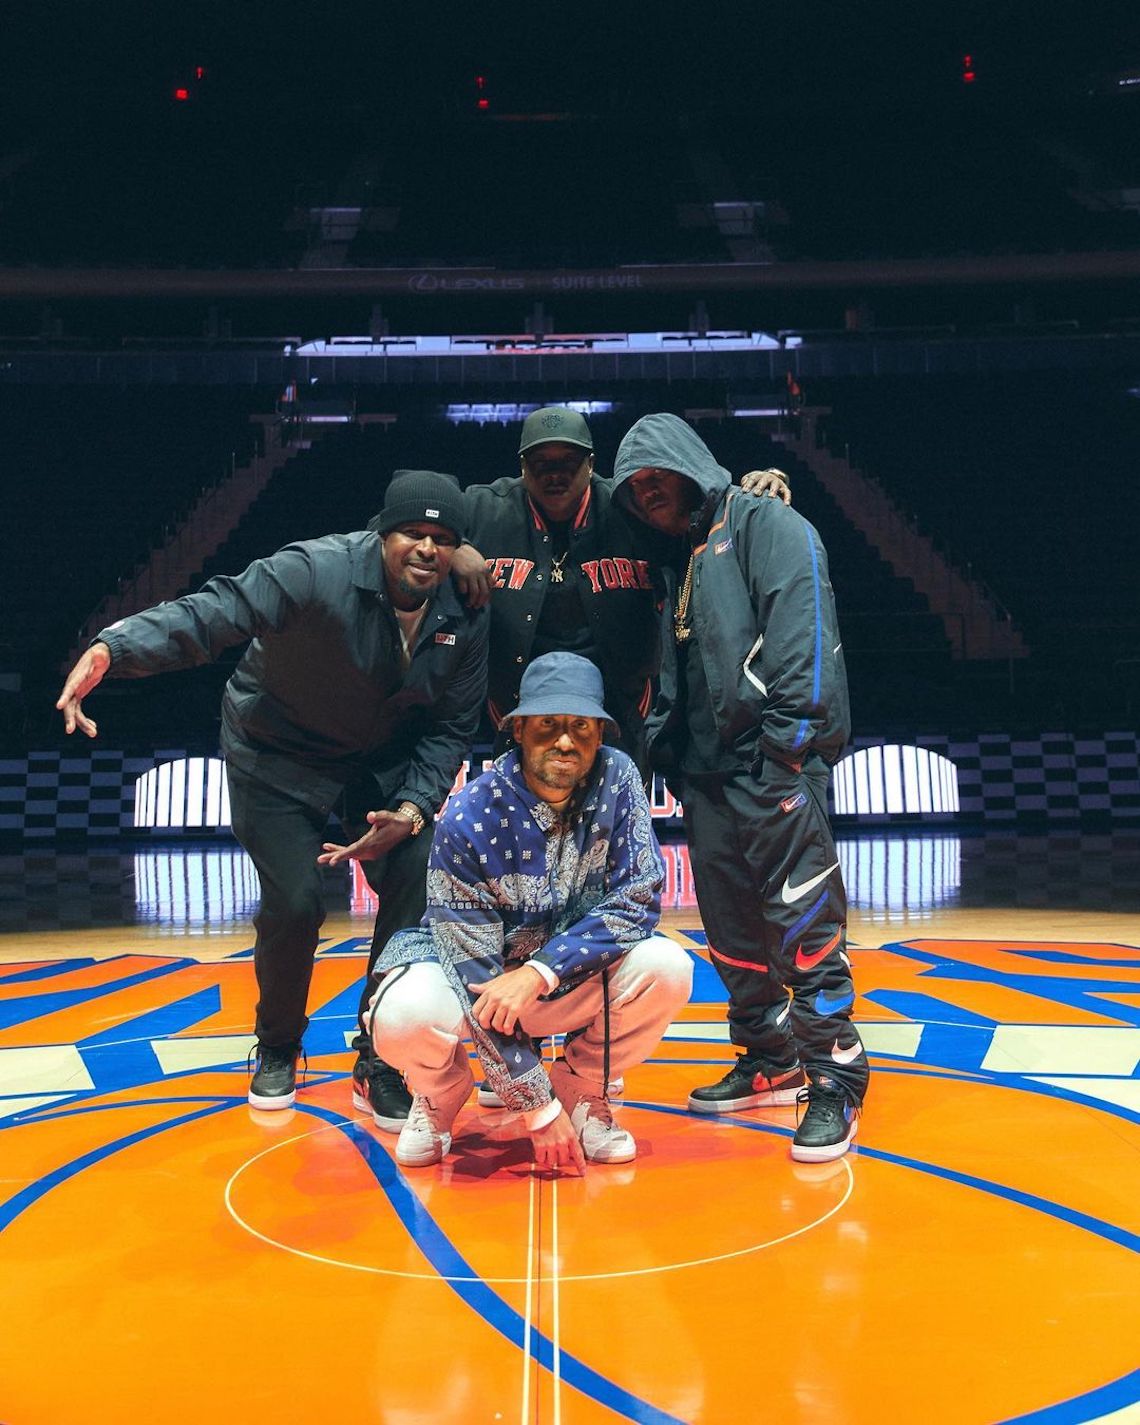 The new KITH ft. Nike x New York Knicks collection